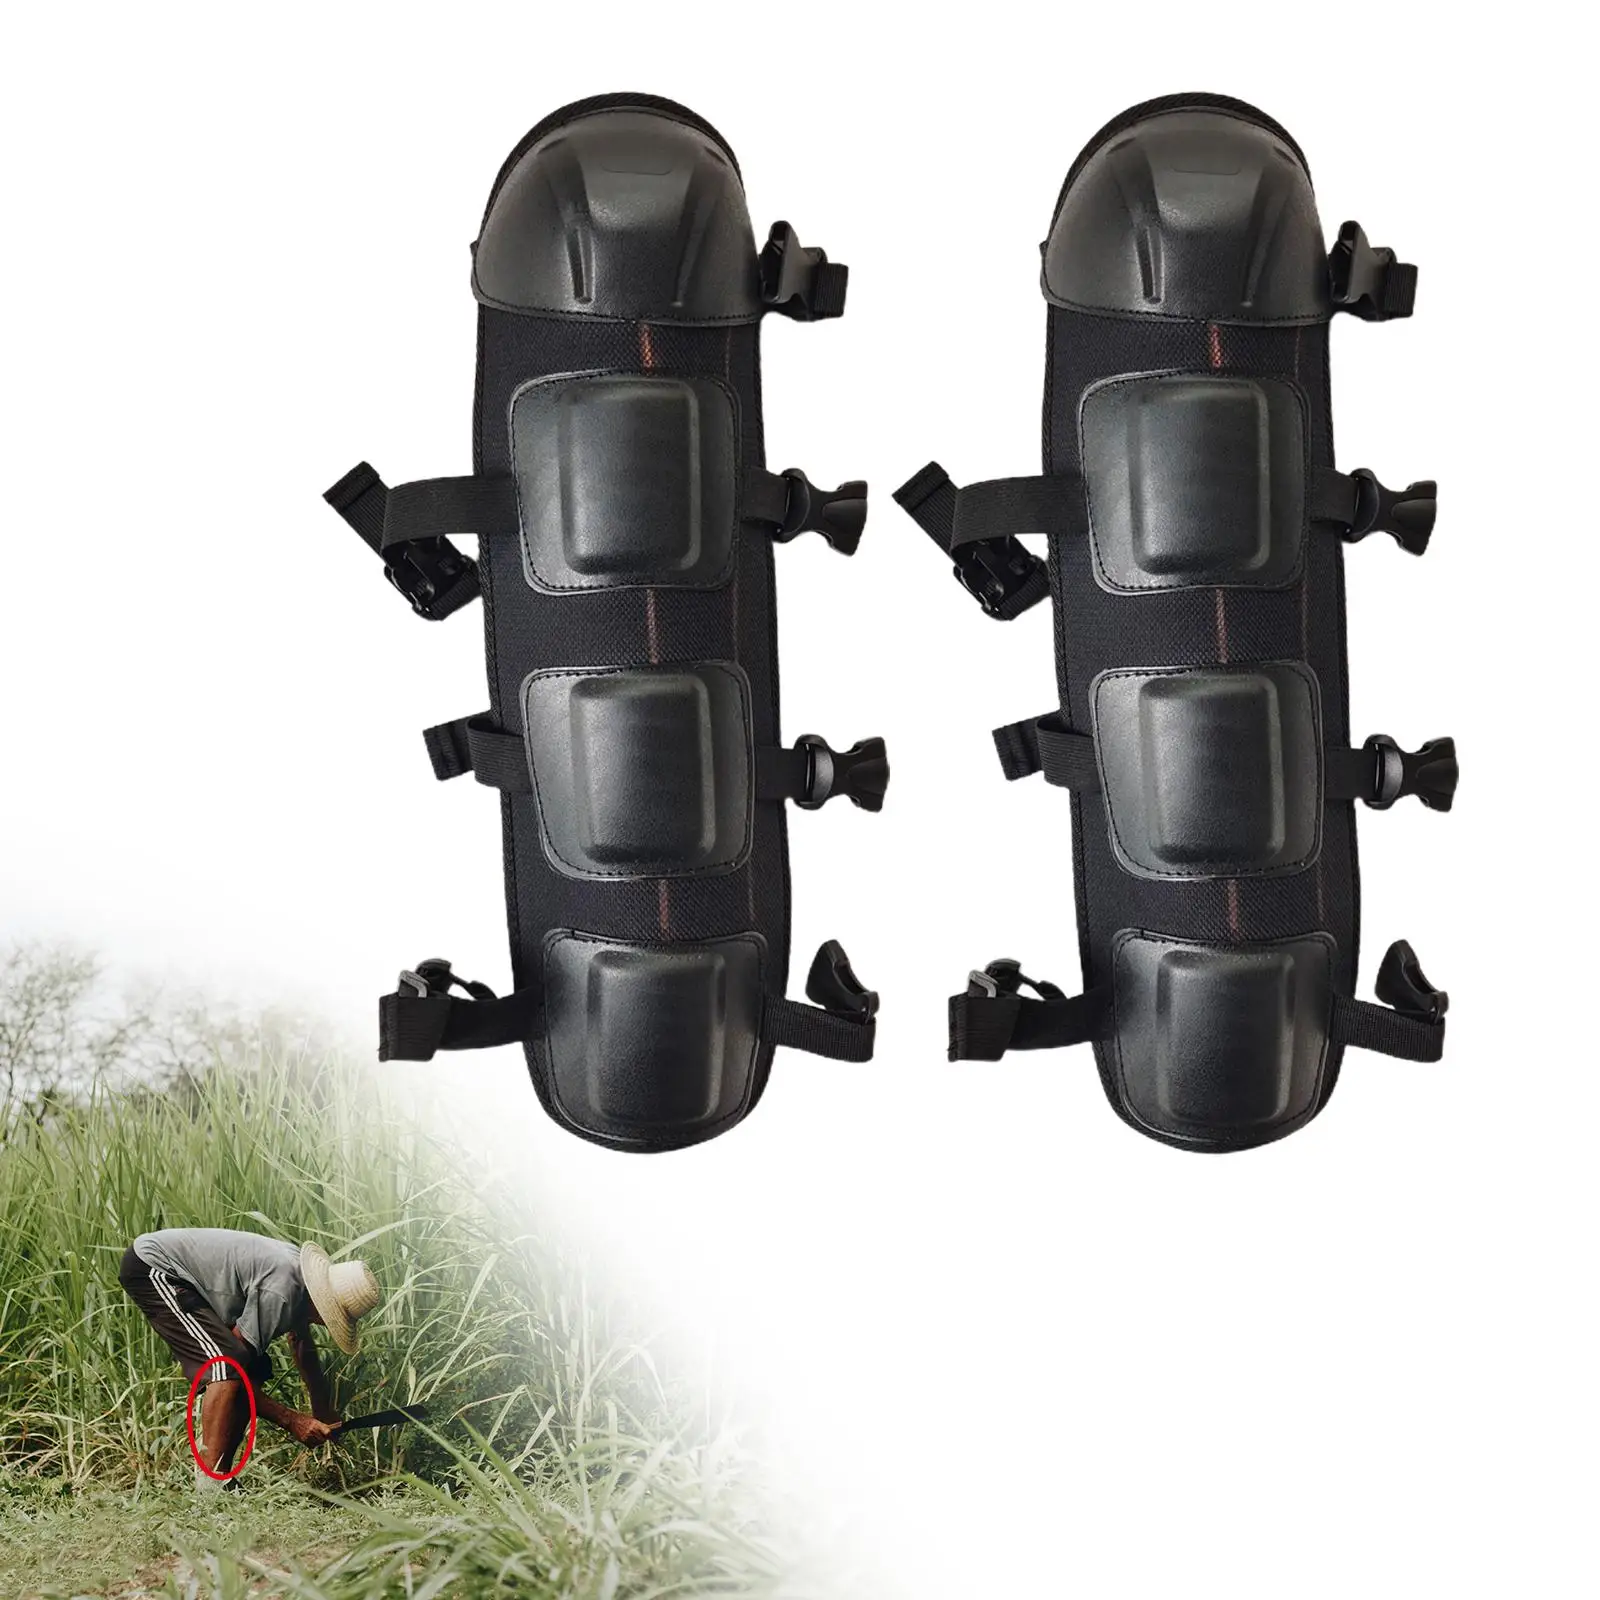 Knee Pads Adjustable Motorcycle Protective for Gardening Scooter Ski